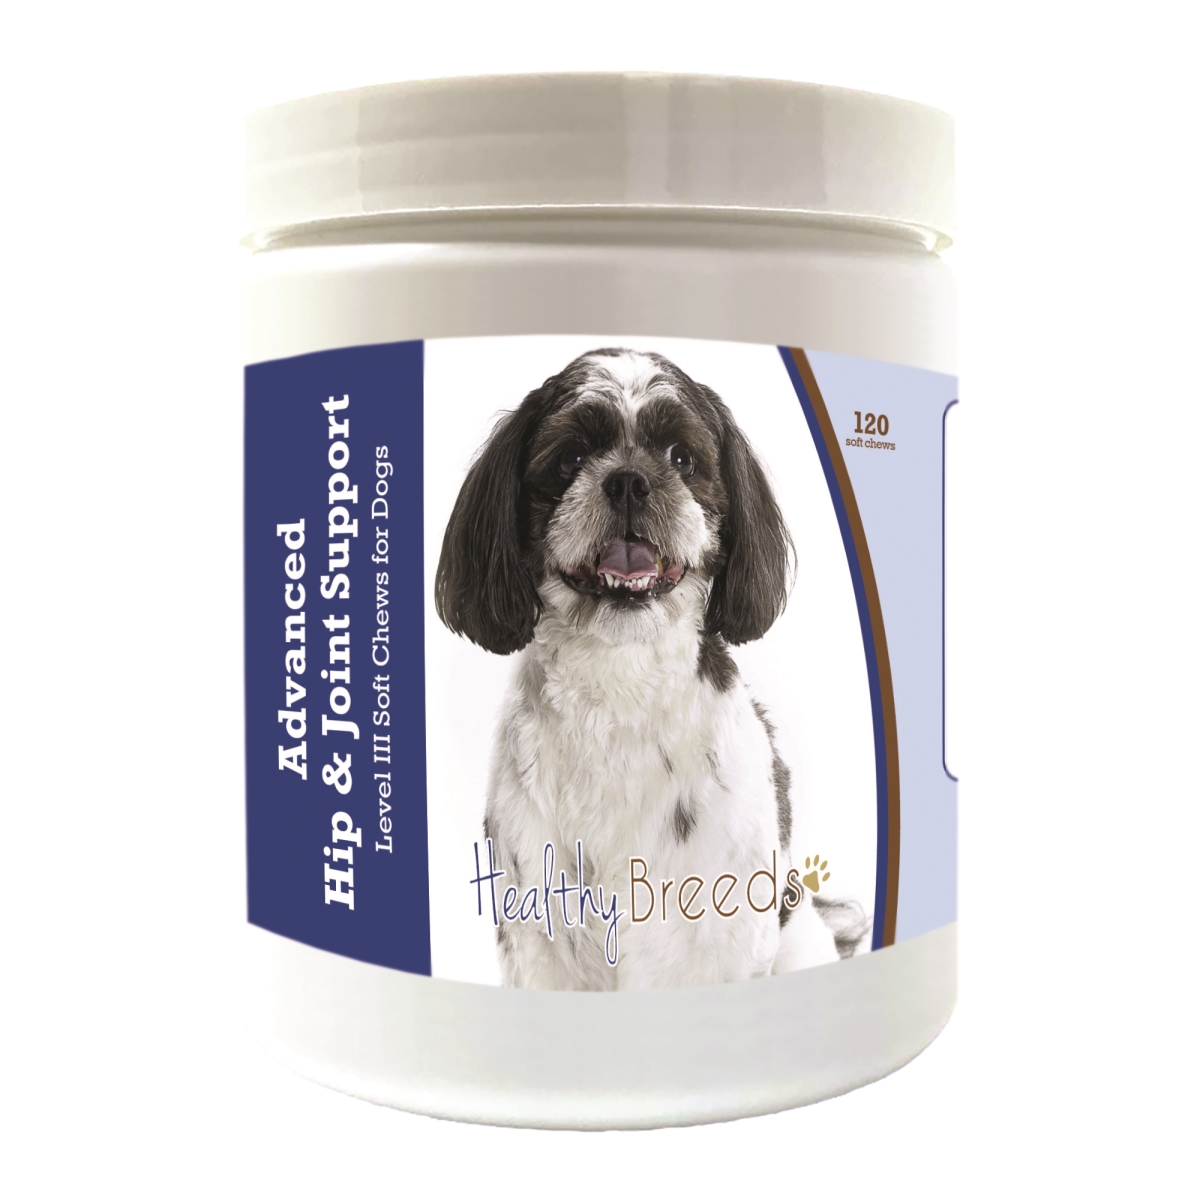 Picture of Healthy Breeds 192959899238 Shih-Poo Advanced Hip & Joint Support Level III Soft Chews for Dogs